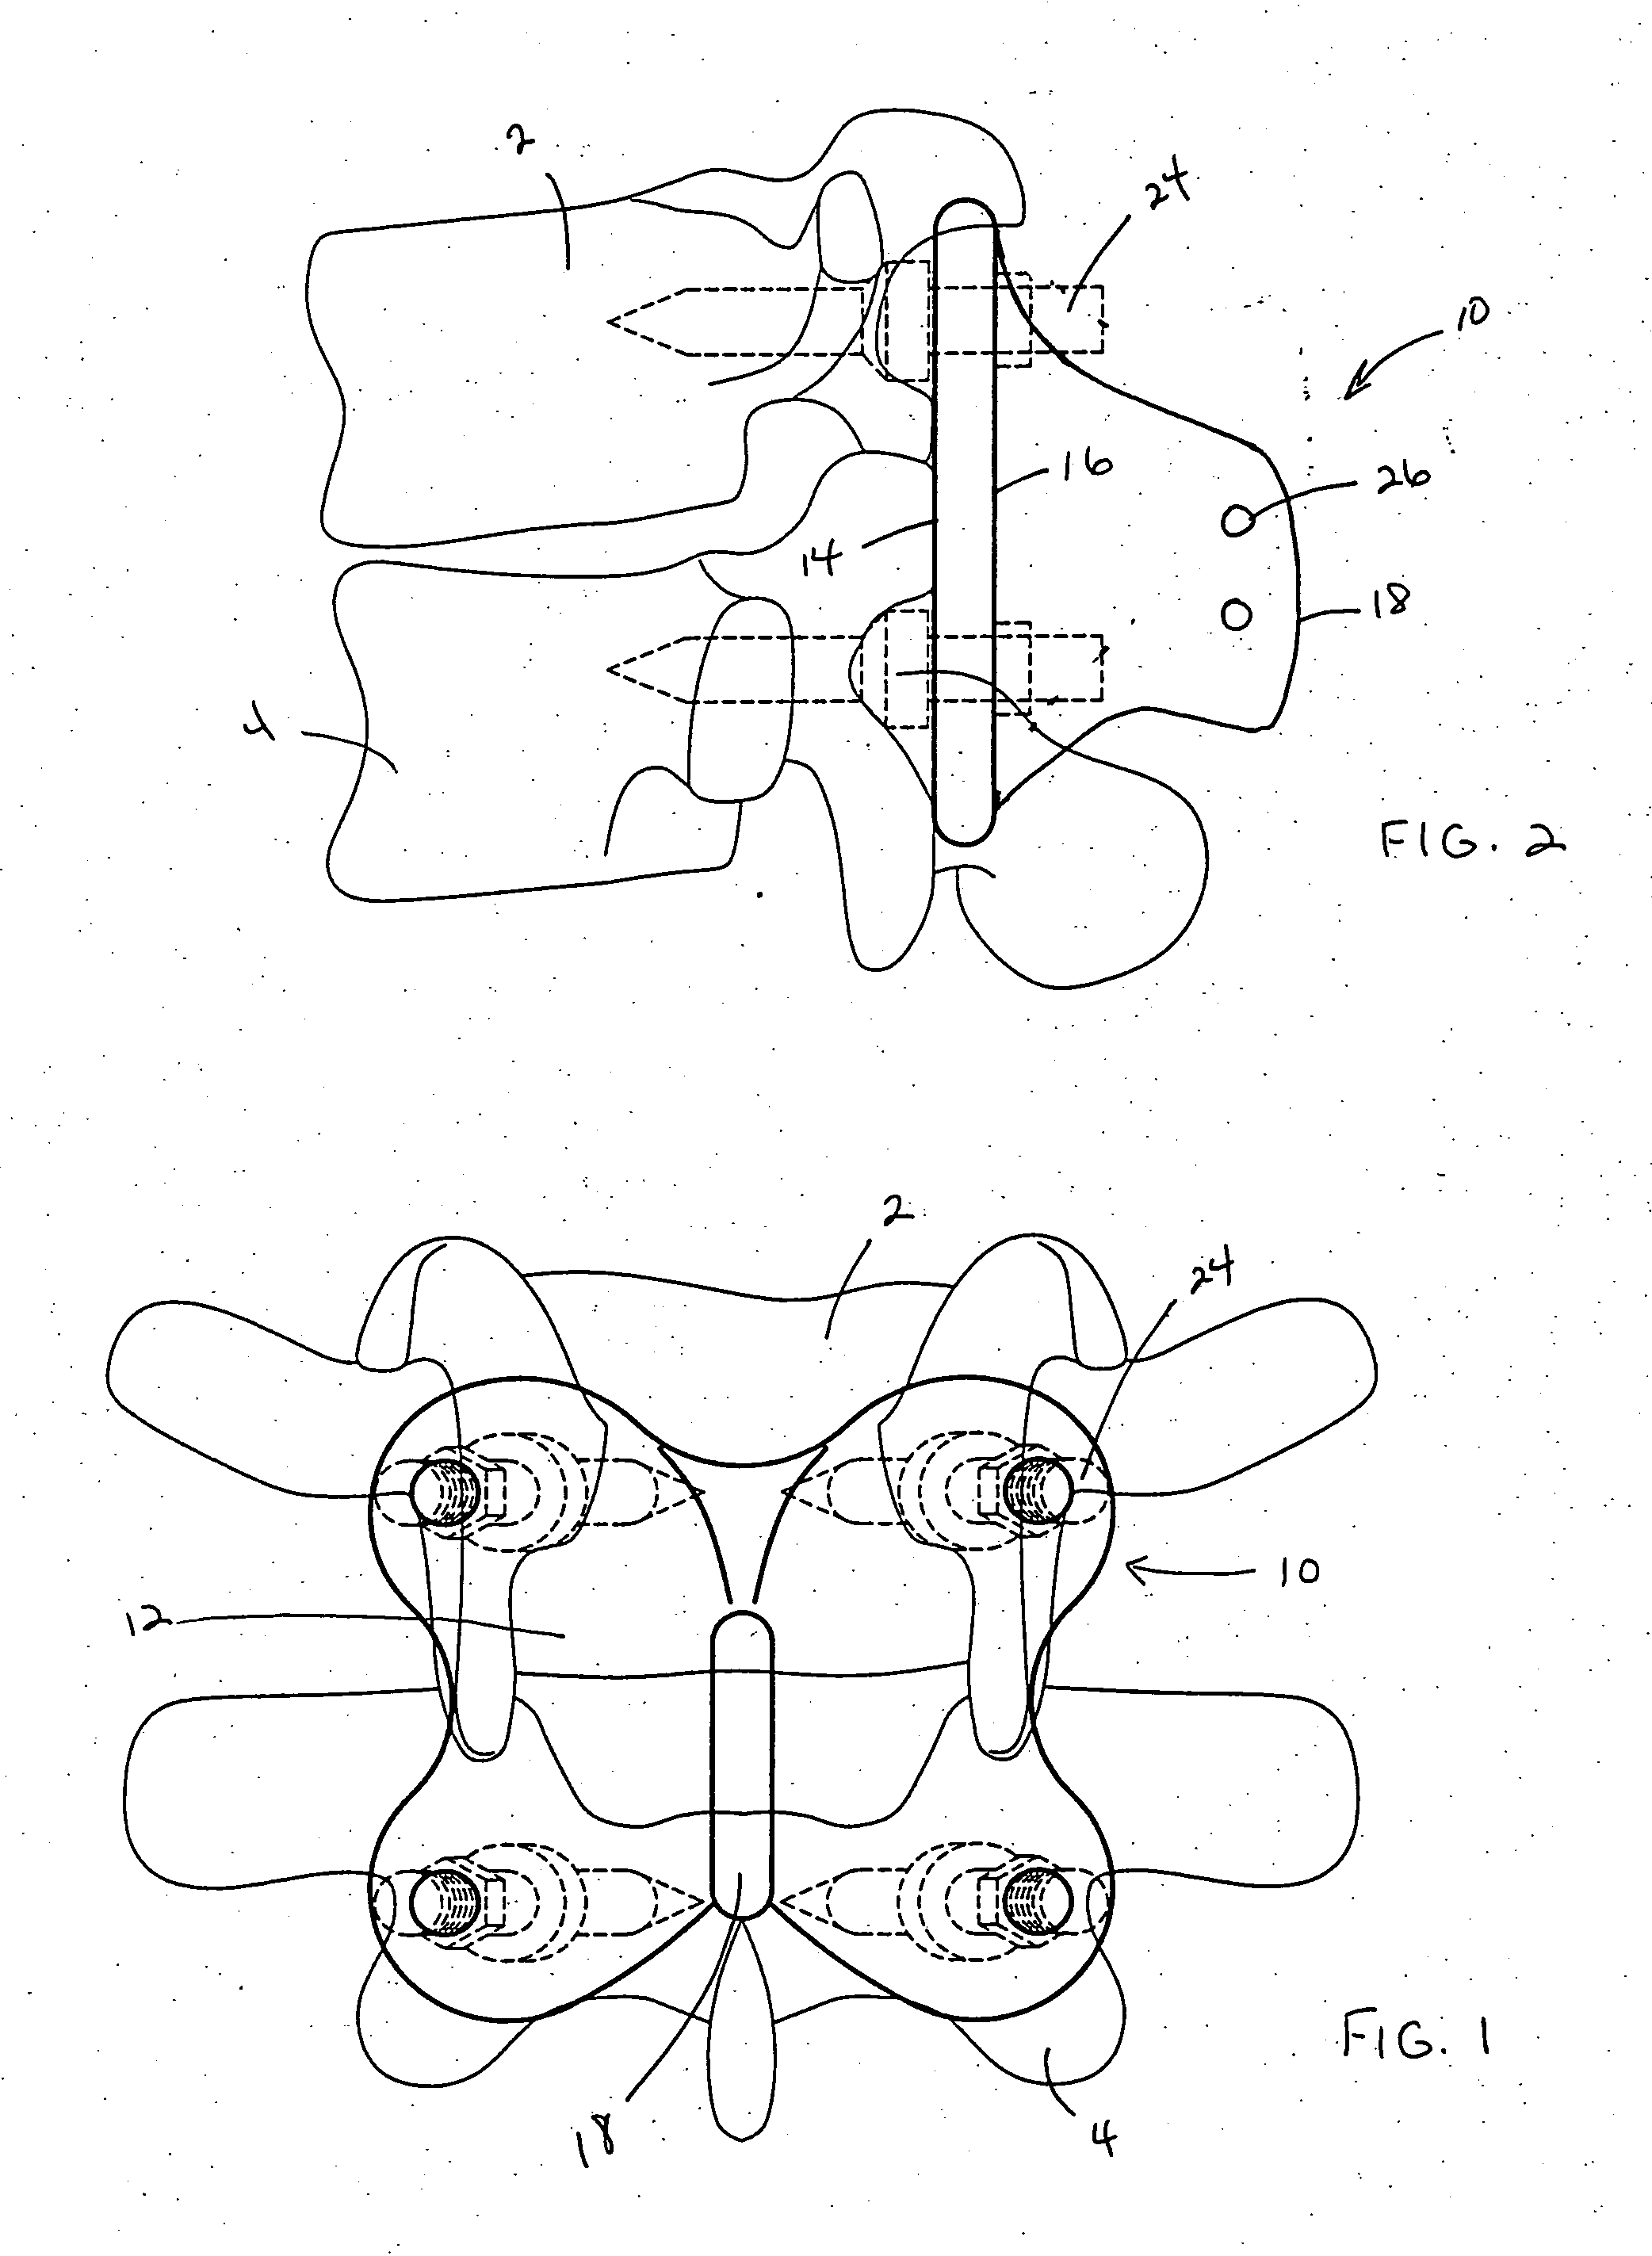 Spinal implant device